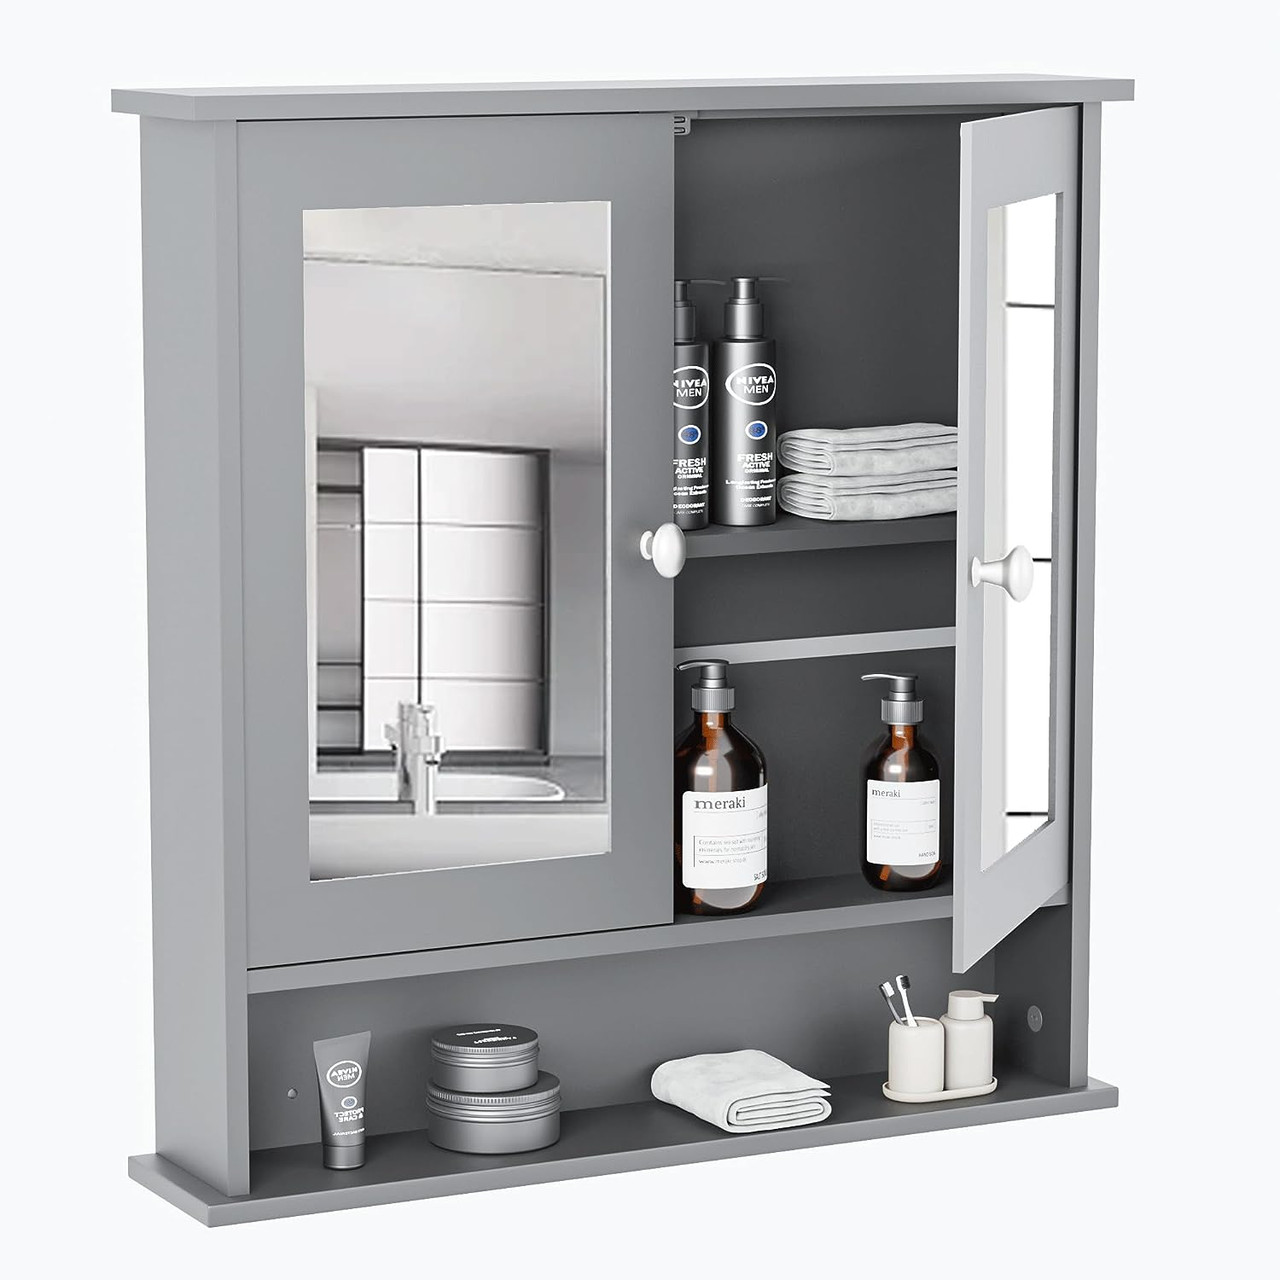 Home Bathroom Wall Mount Medicine Cabinet Storage Cabinet with